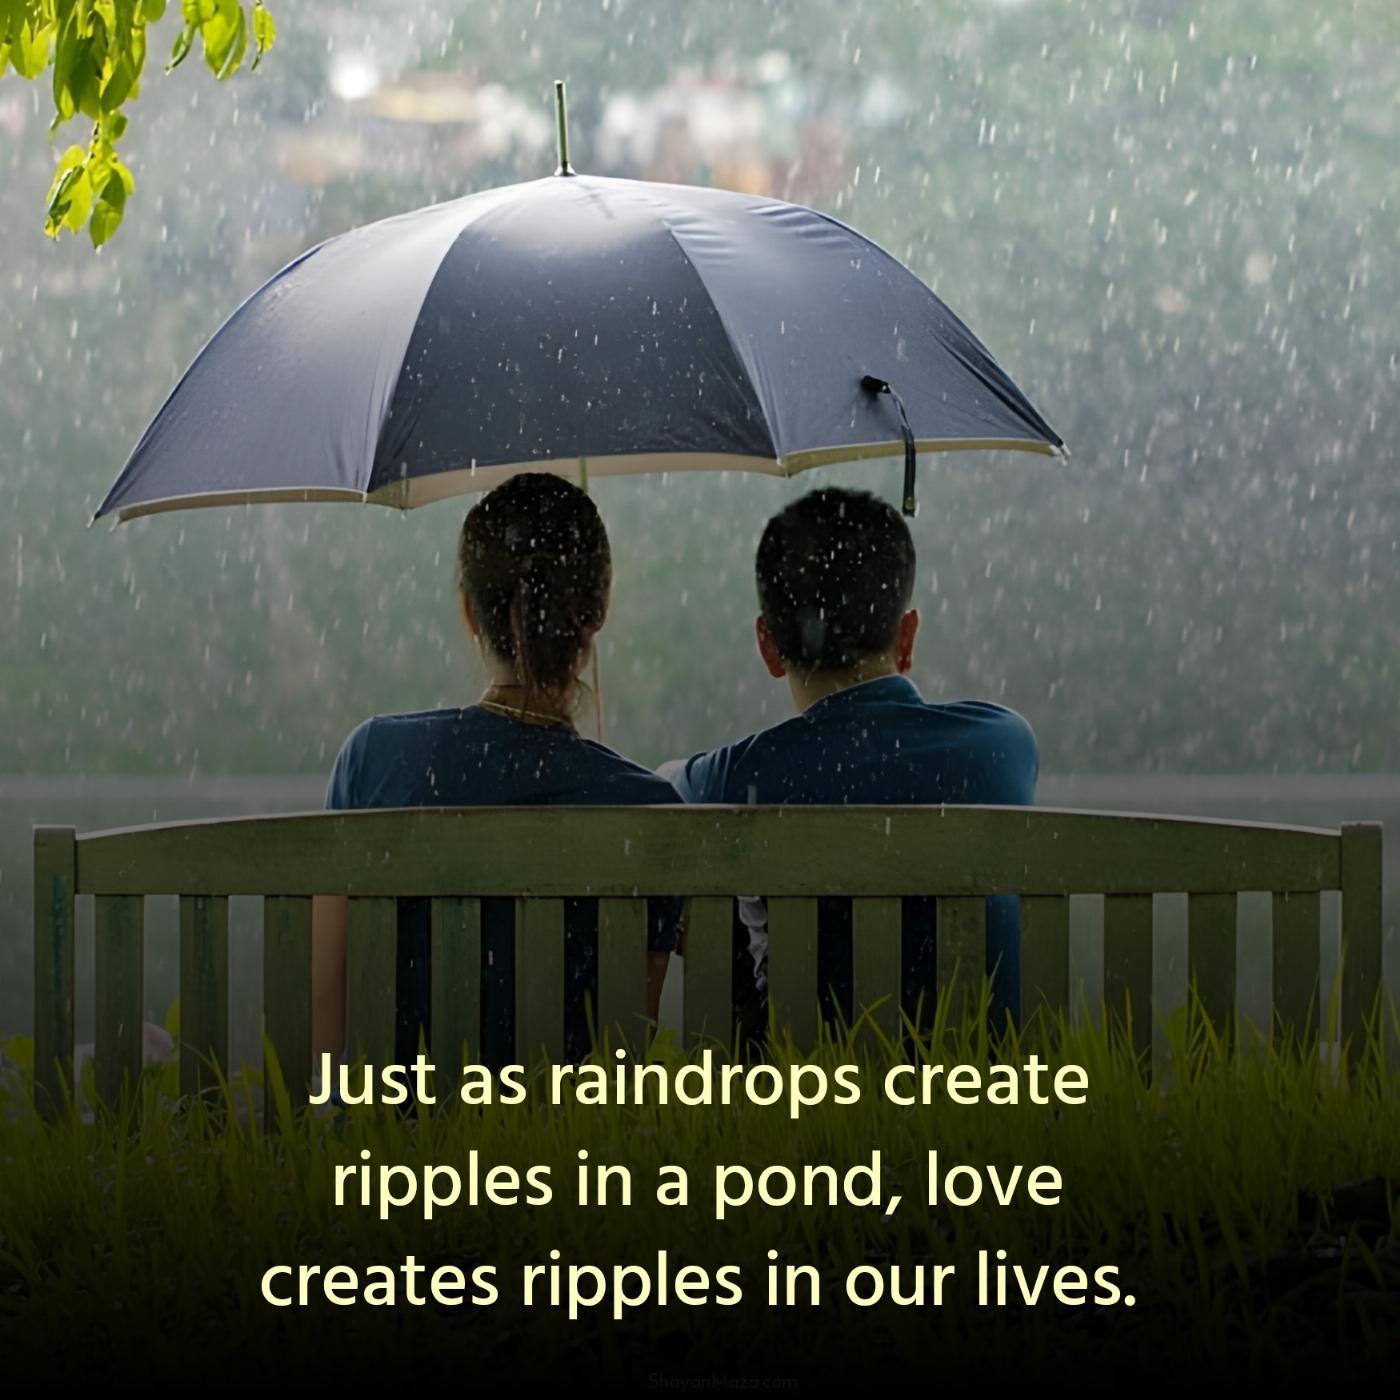 Just as raindrops create ripples in a pond love creates ripples